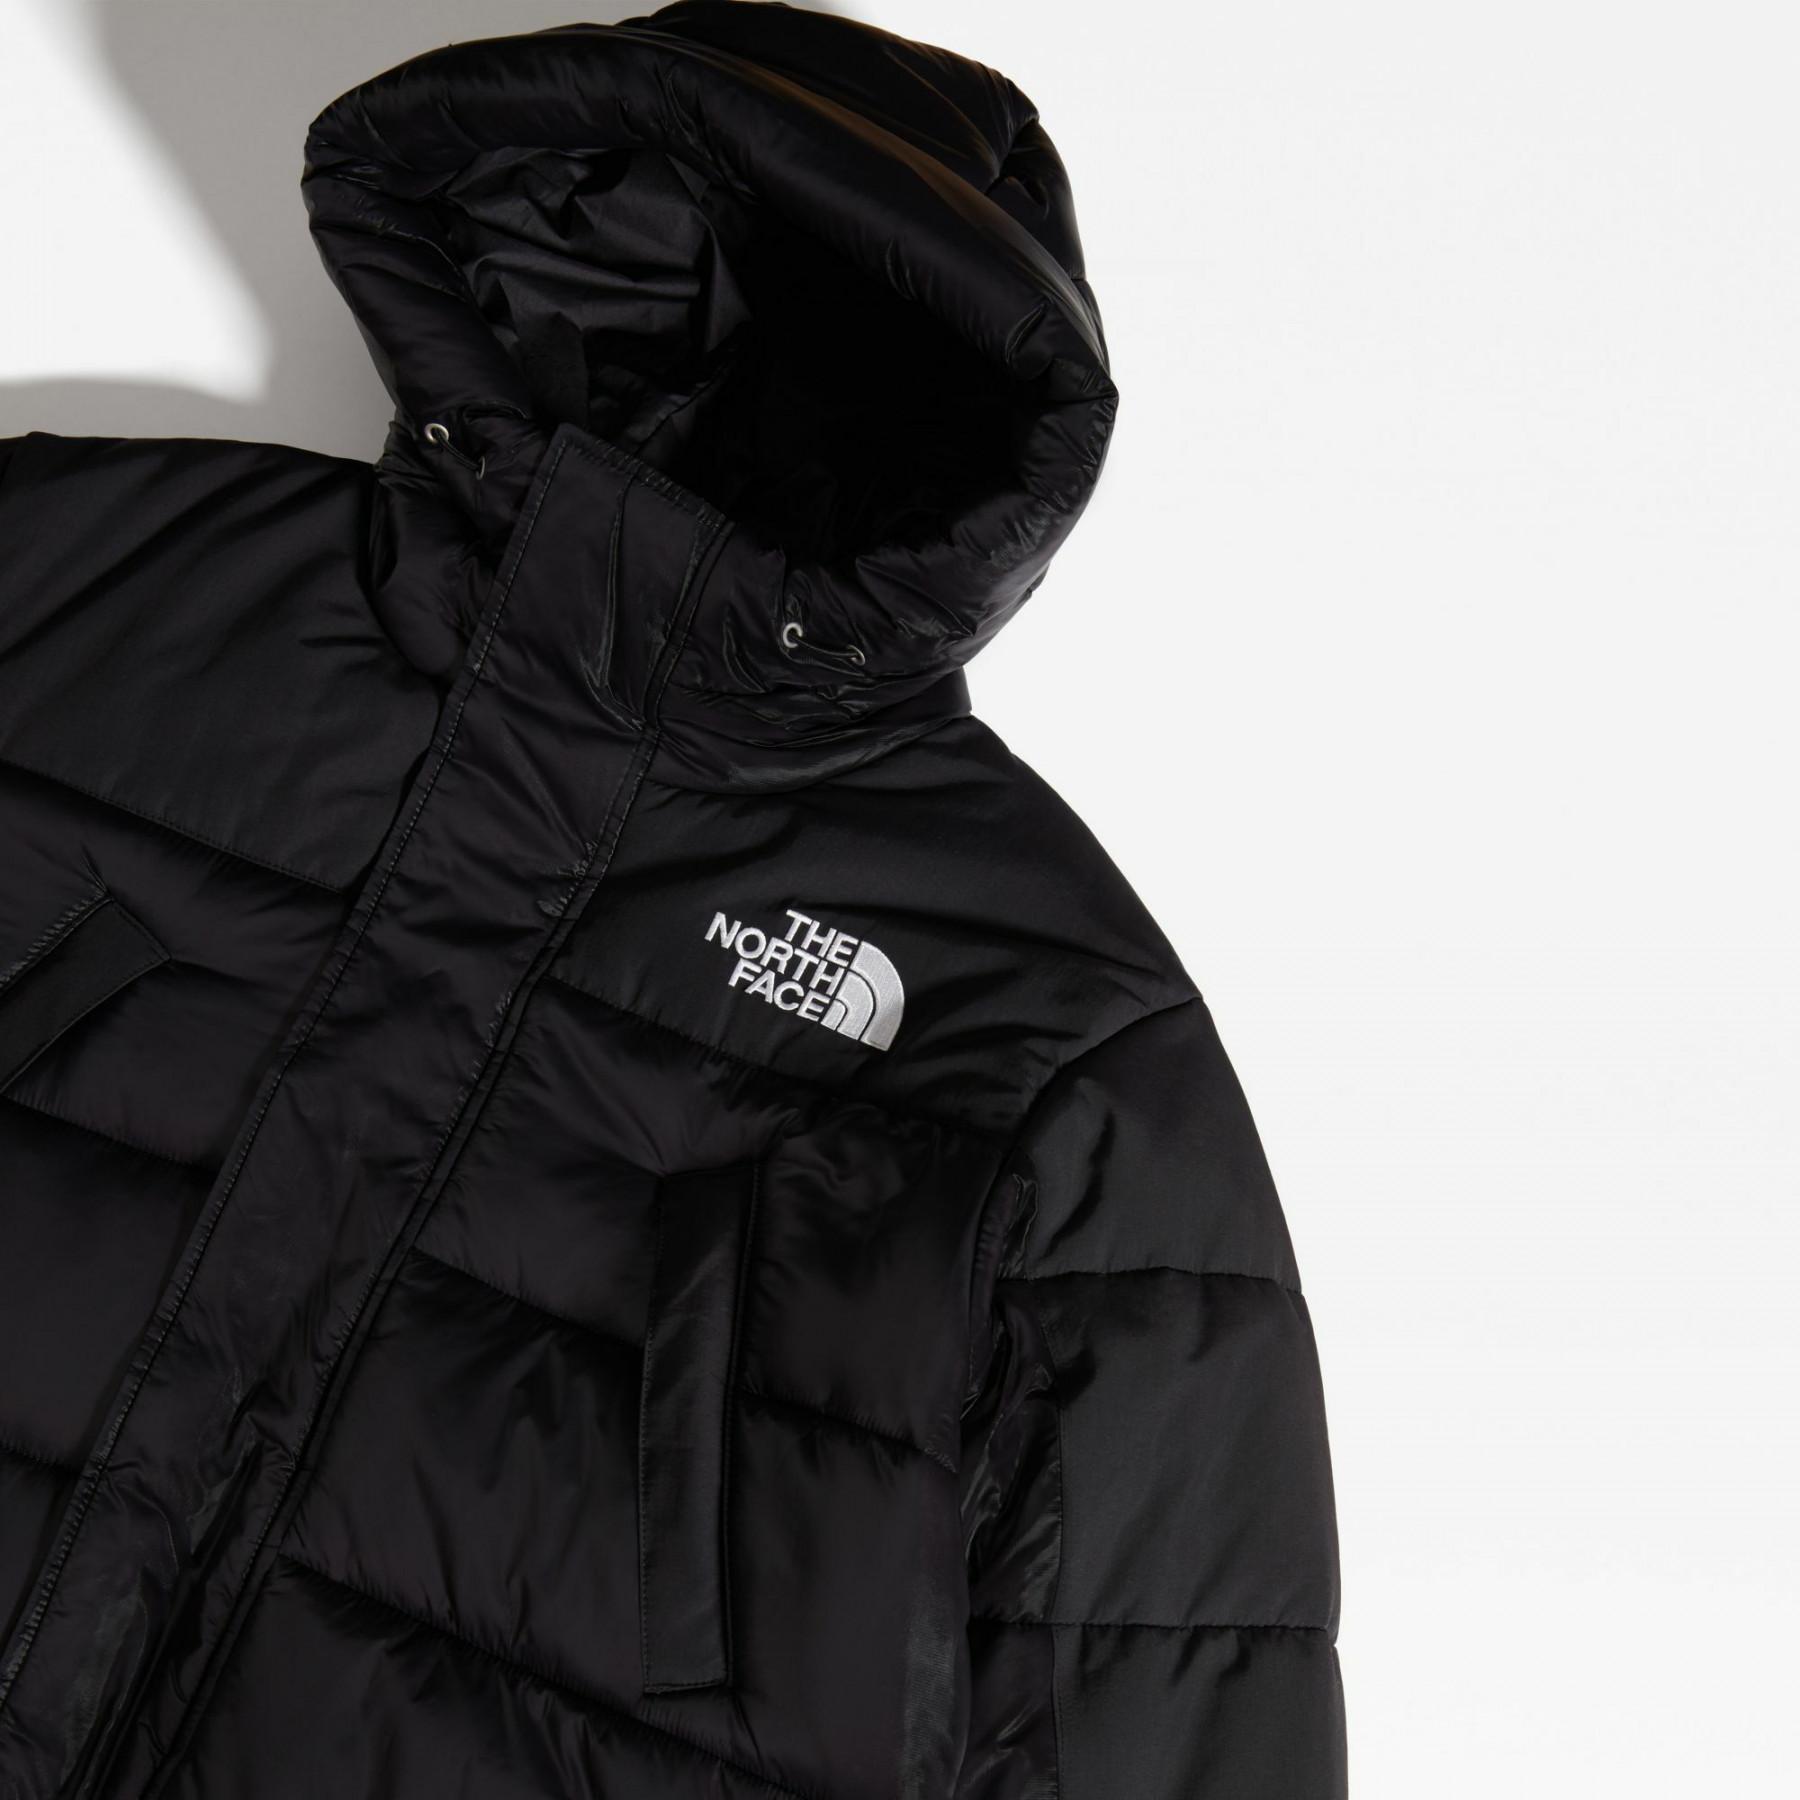 Parka The North Face Hmlyn Insulated - Jackets - Clothing - Men